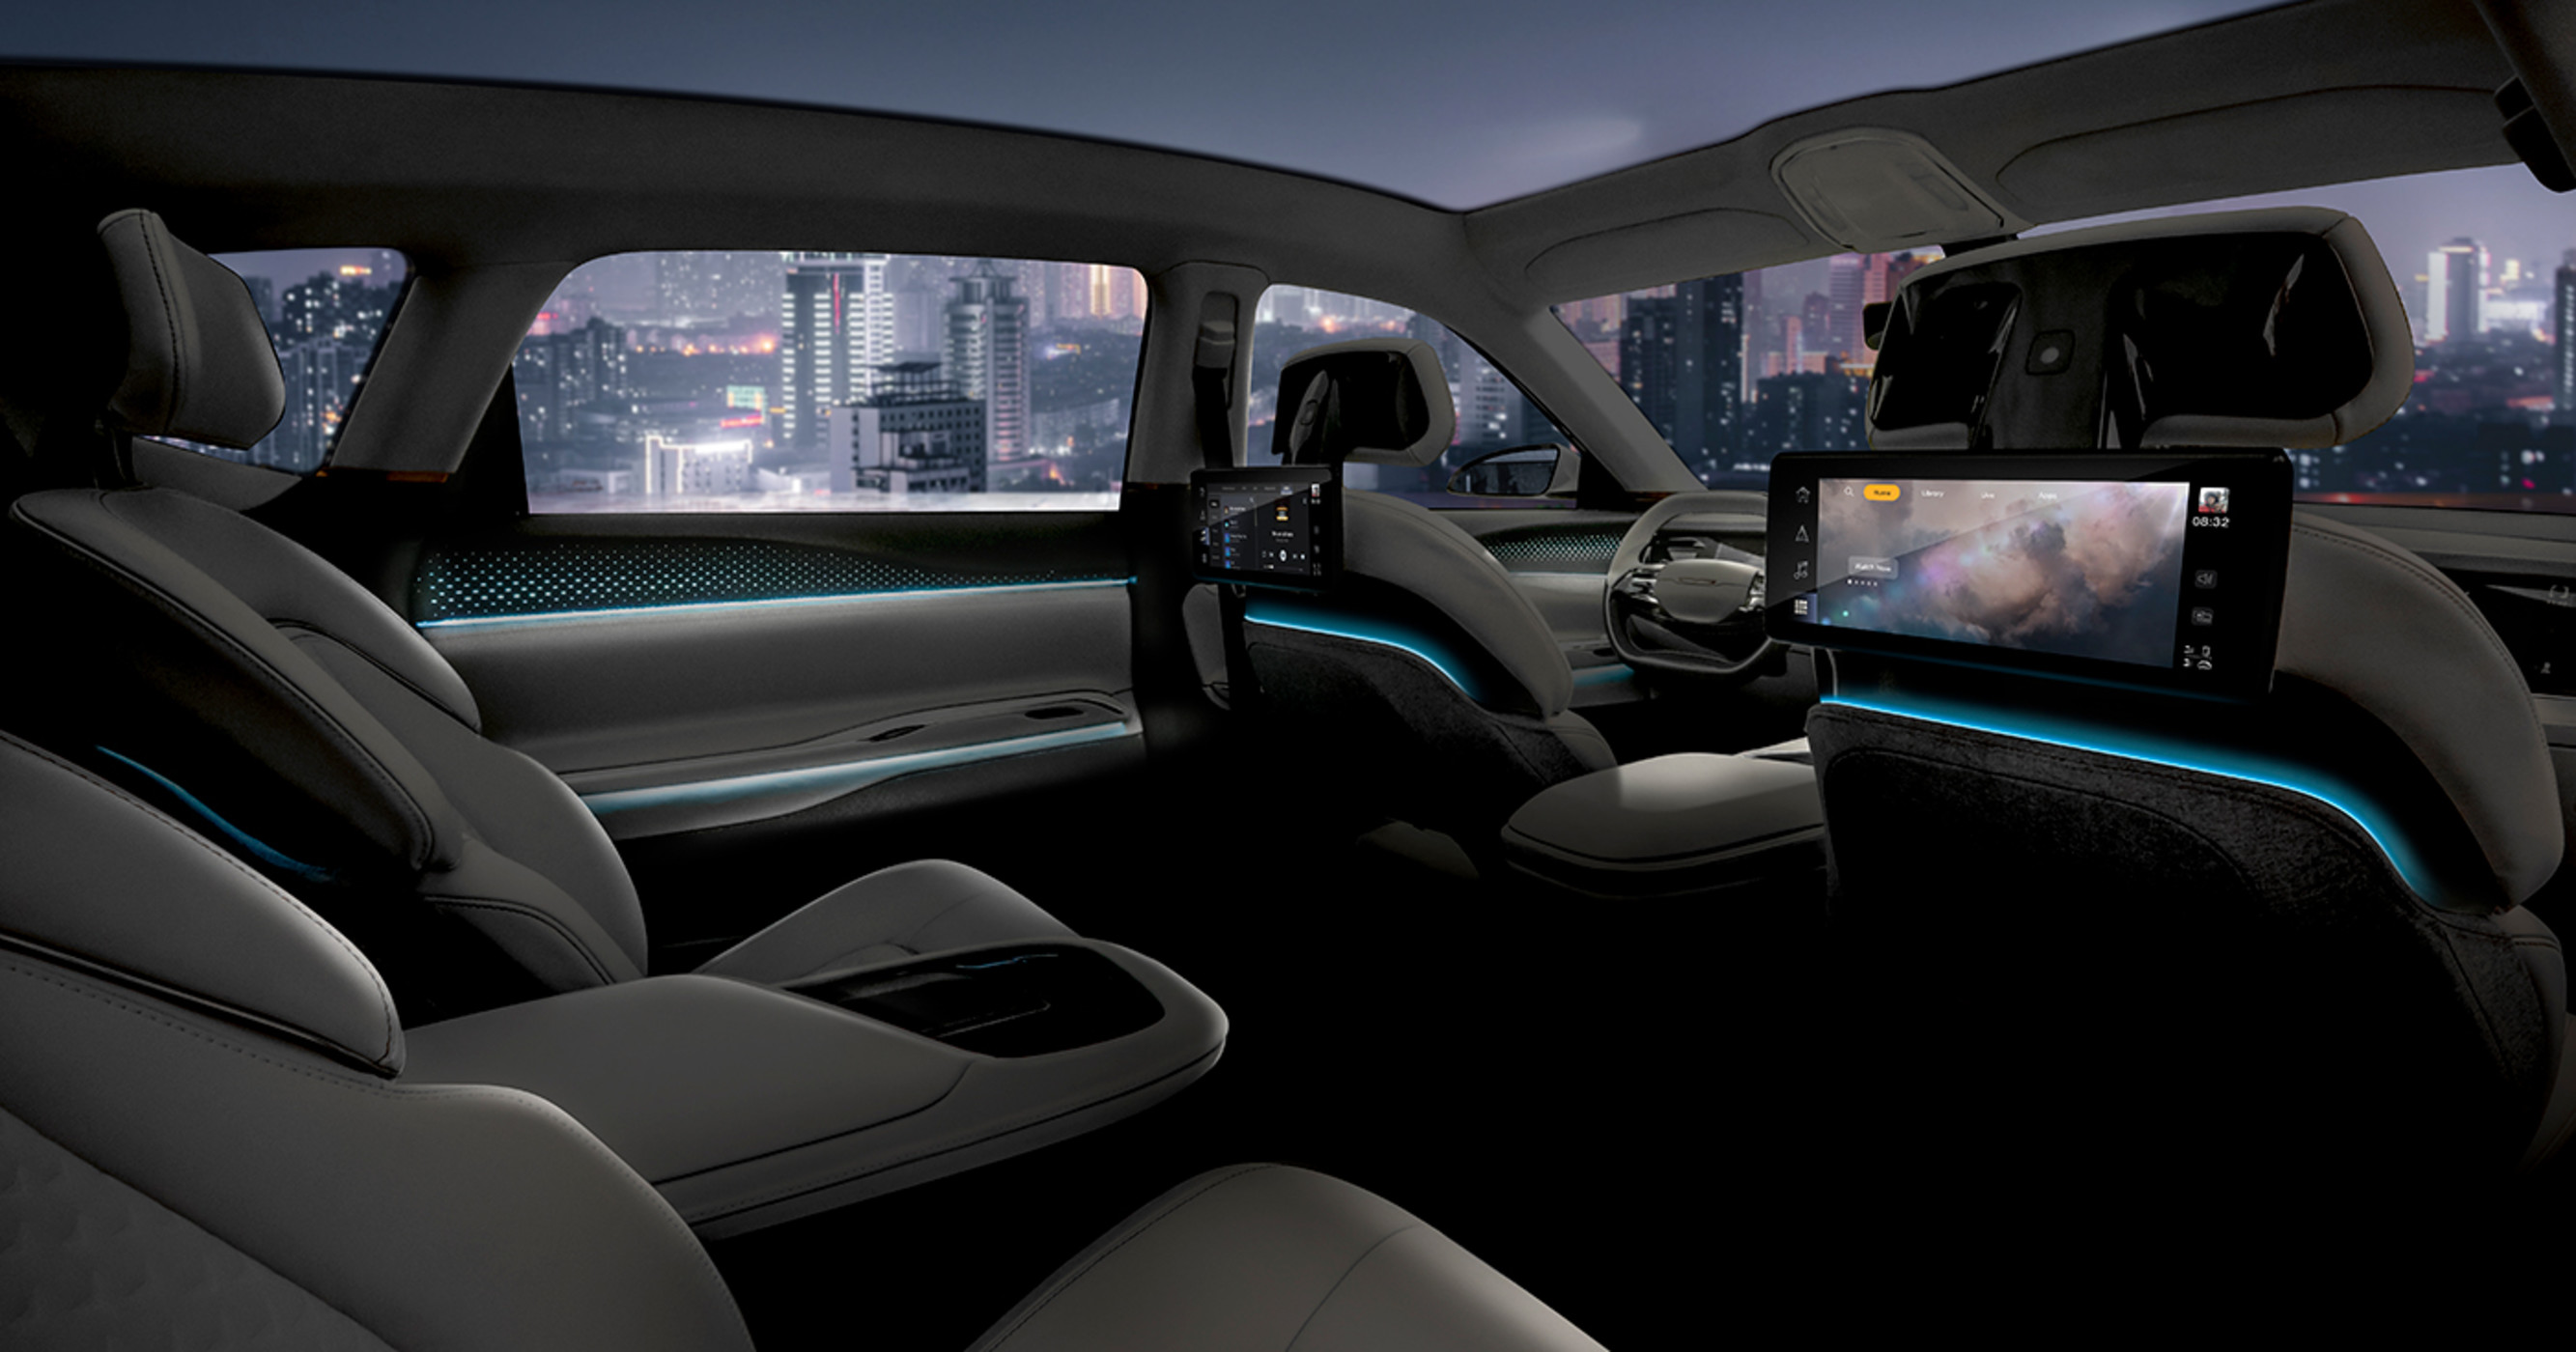 An interior view of a concept vehicle from the backseat right side passenger, overlooking a city landscape.